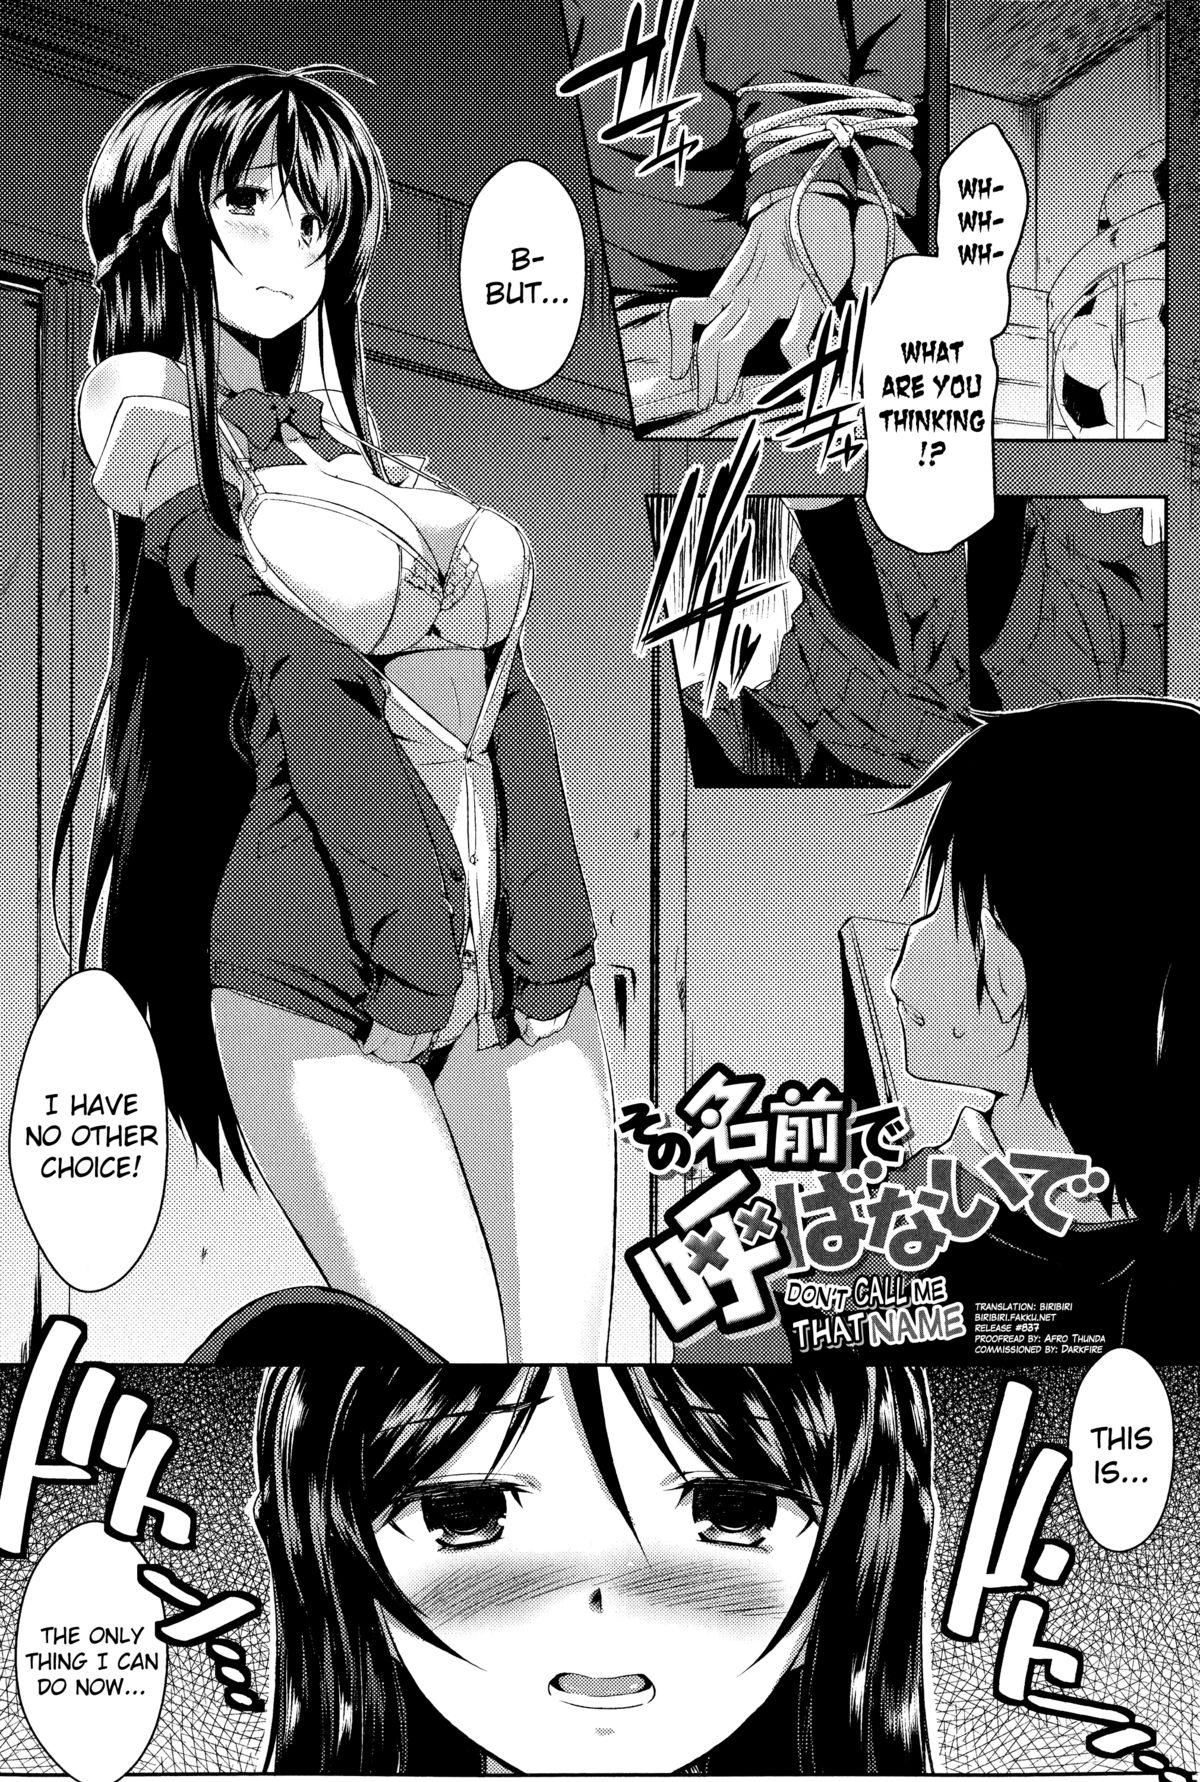 Jap Sono Namae de Yobanaide Ch. 1 | Don't call me that name Hot Girls Getting Fucked - Page 1